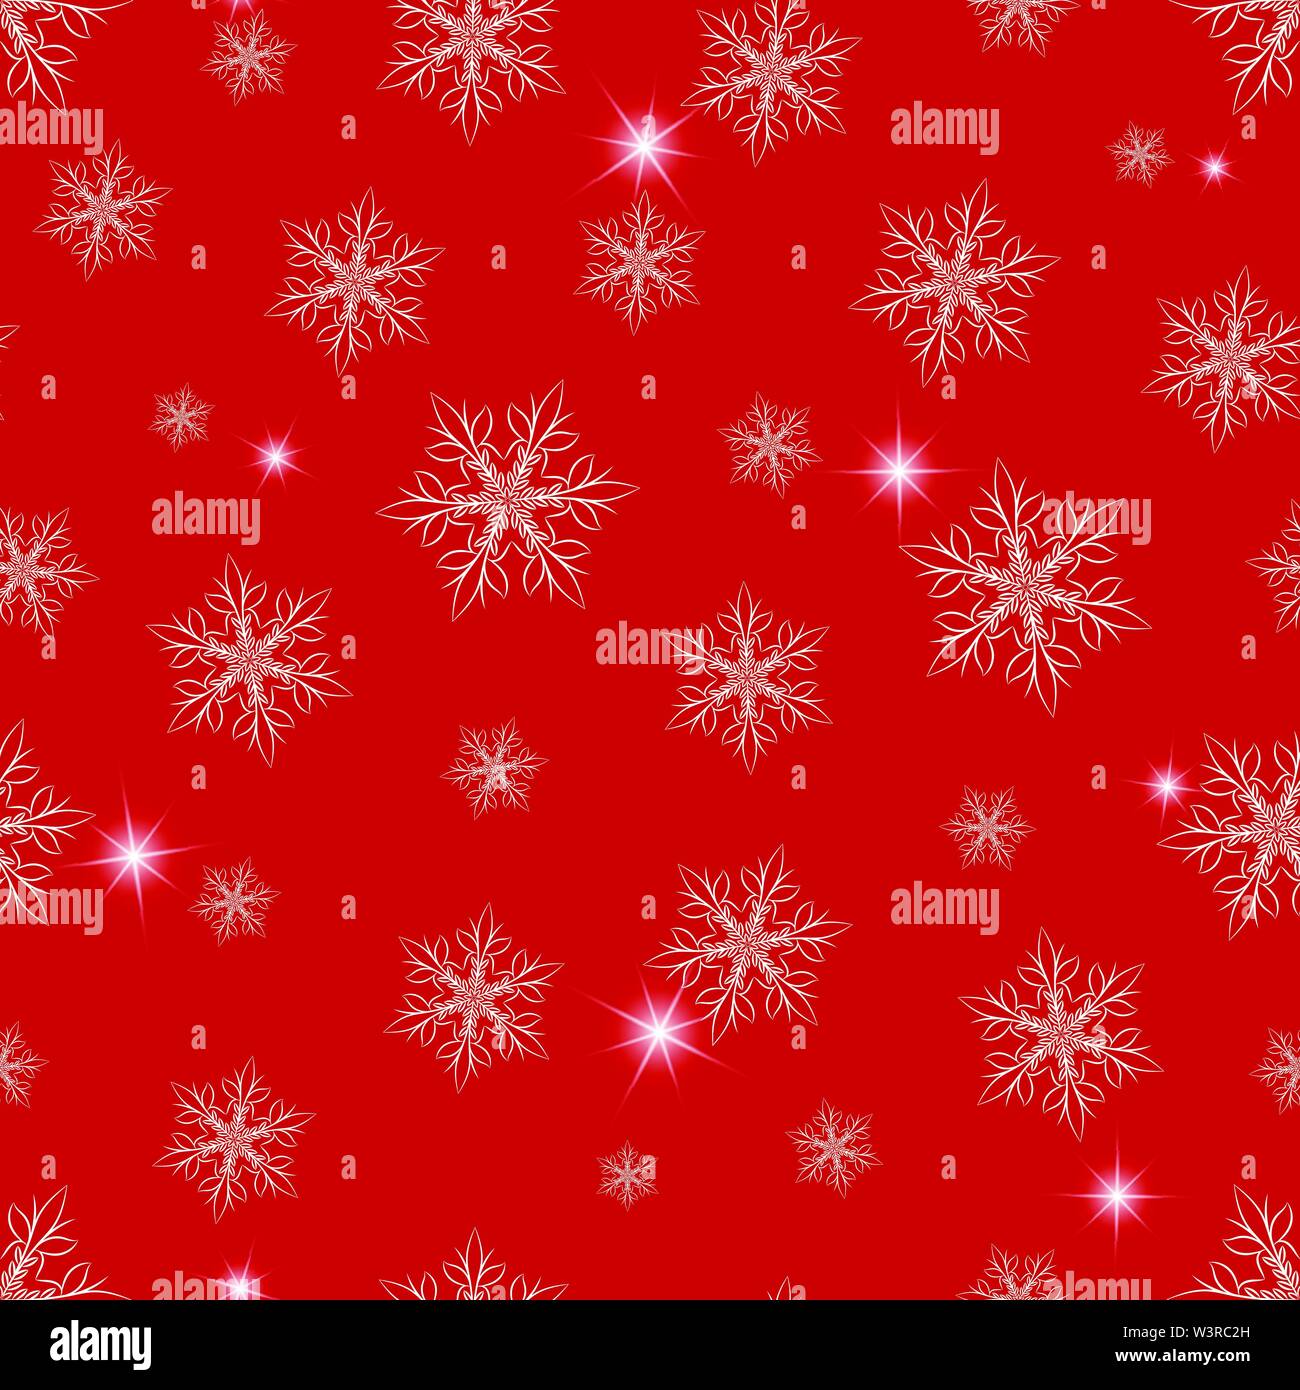 Winter seamless pattern with snowflakes, sparkles. Stock Vector